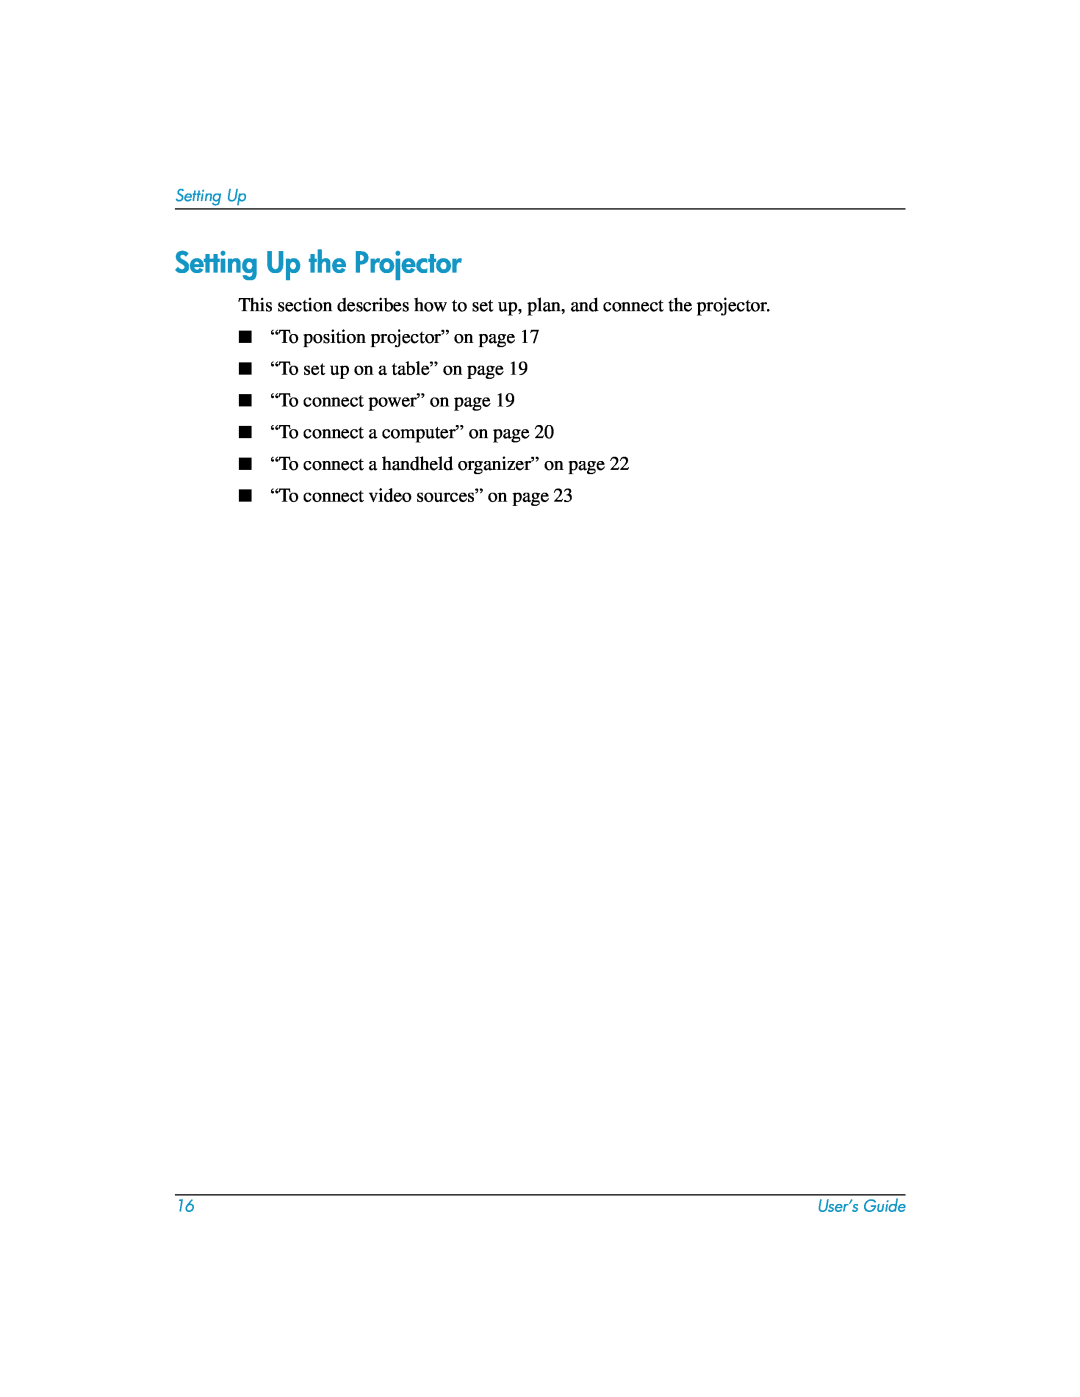 HP mp3135w Setting Up the Projector, This section describes how to set up, plan, and connect the projector, User’s Guide 